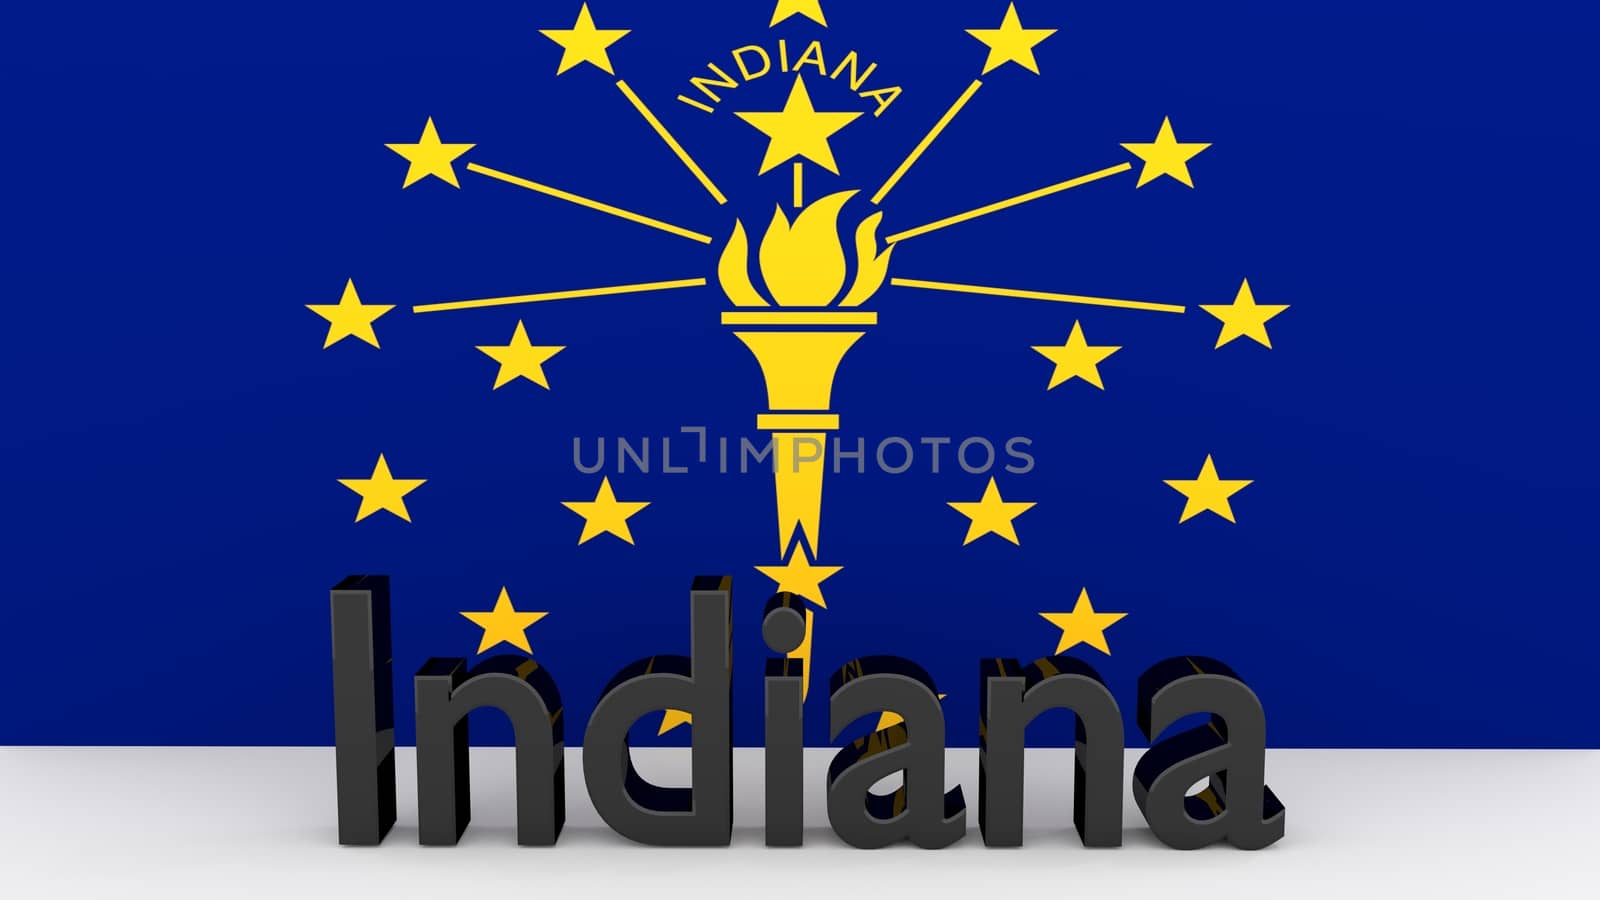 Writing with the name of the US state Indiana made of dark metal  in front of state flag